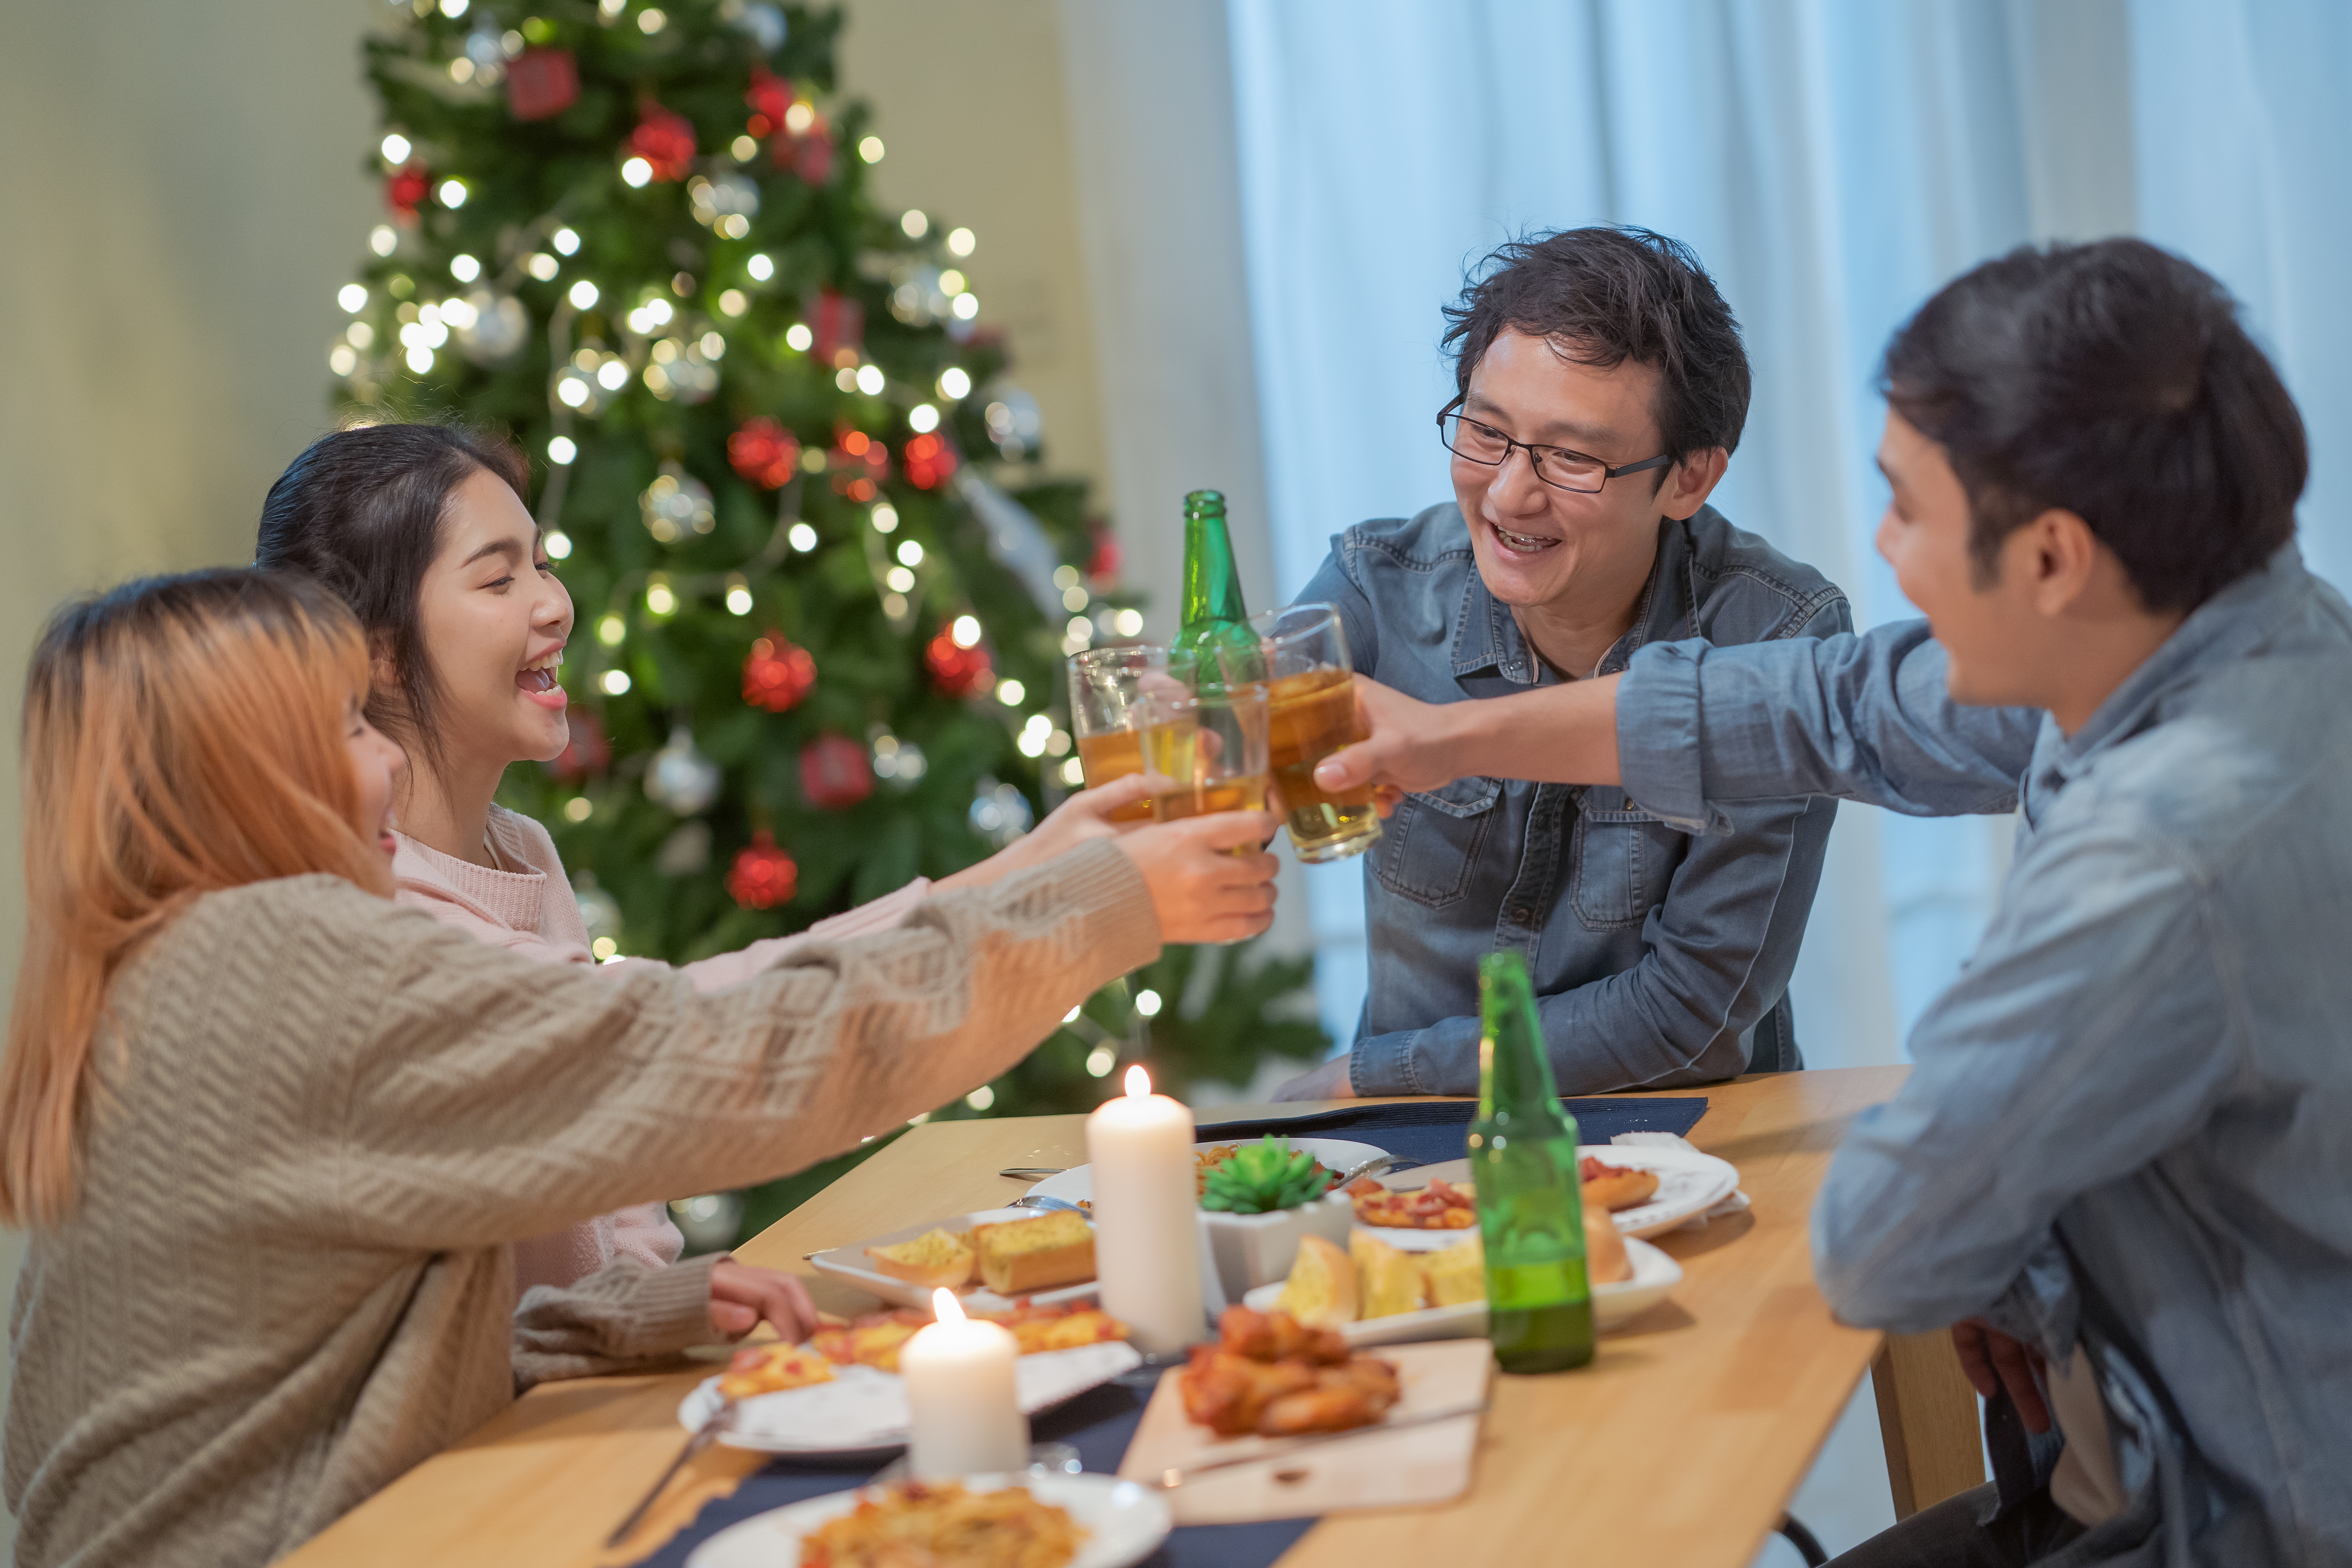 festive feasting image of people eating and drinking together